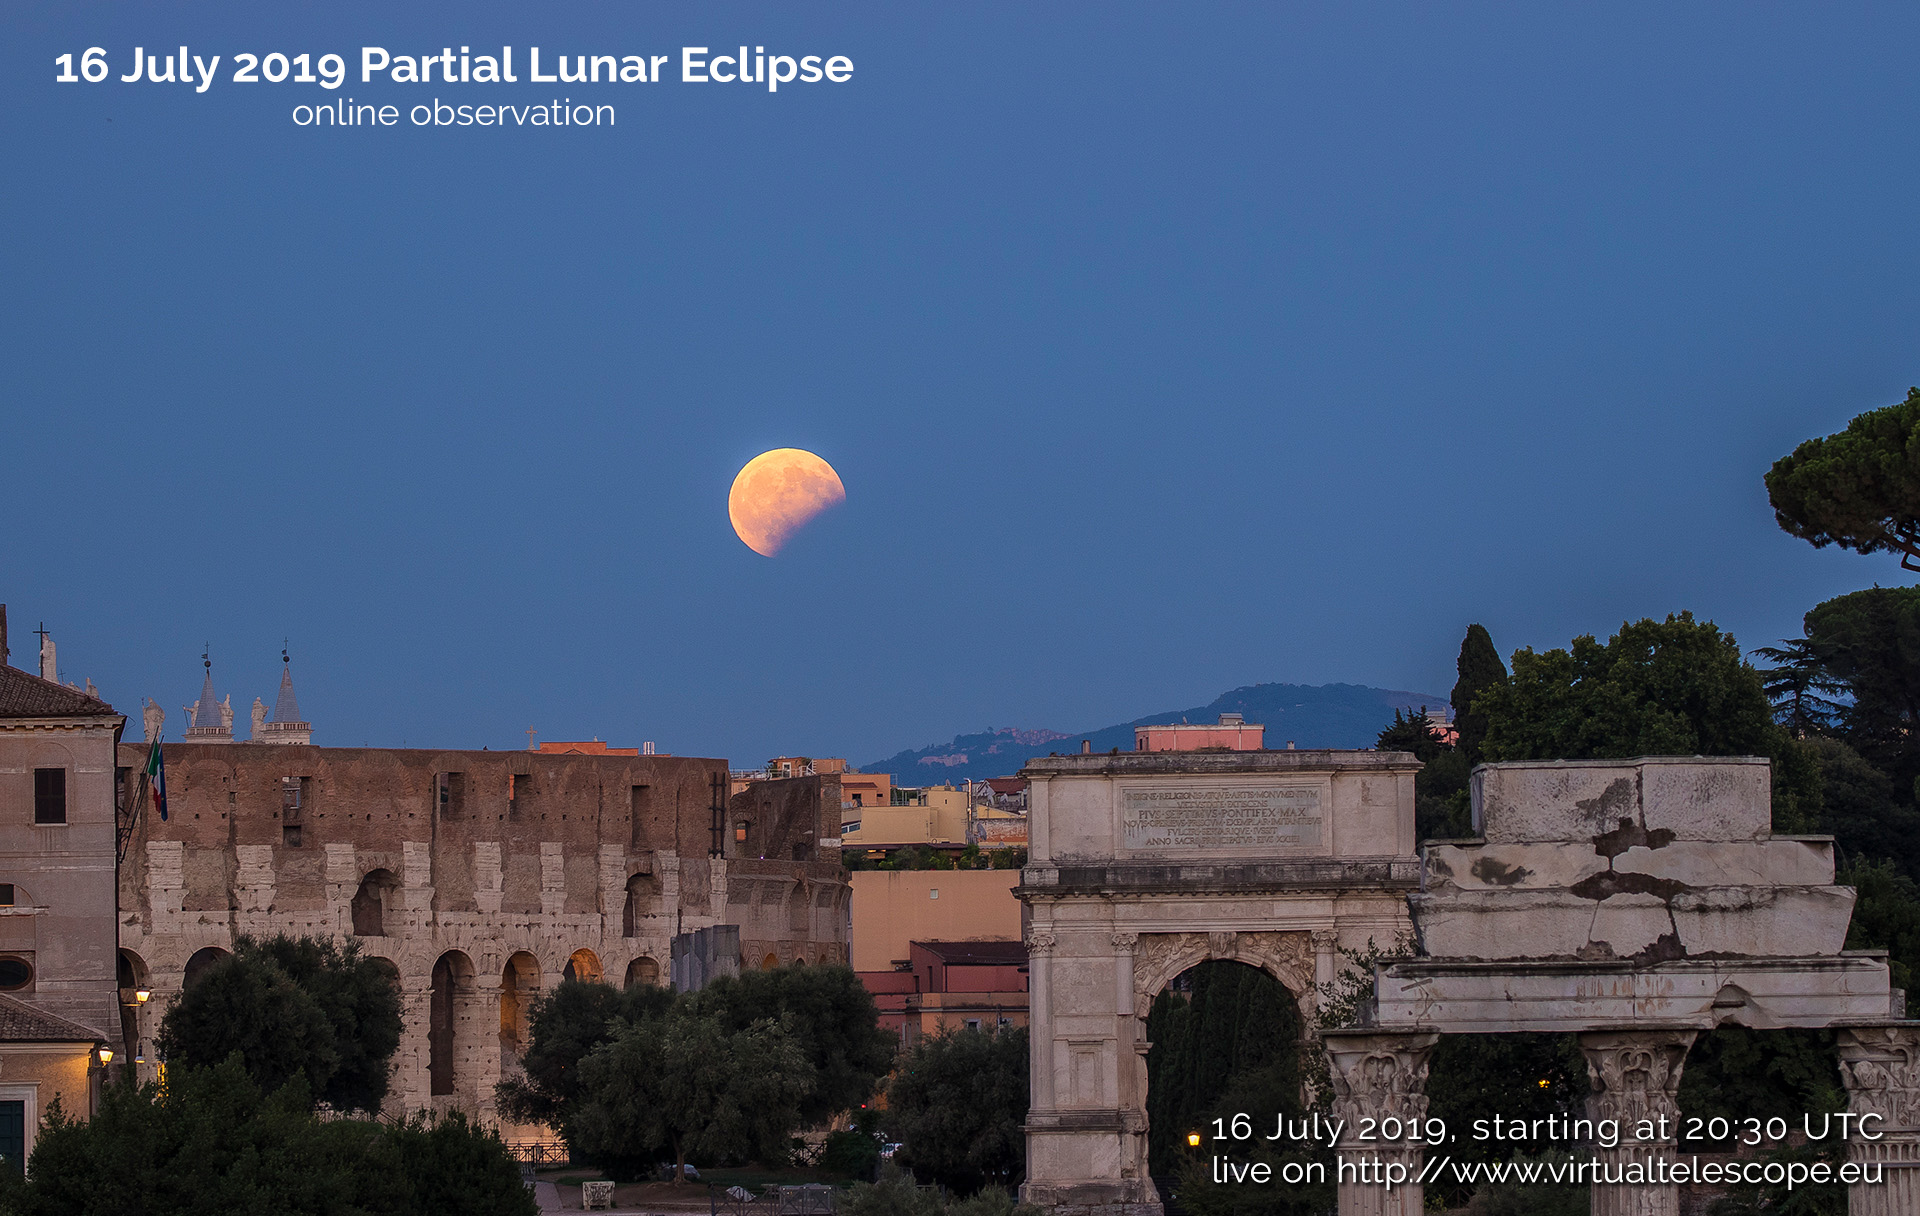 The 16 July 2019 partial lunar eclipse - poster of the event